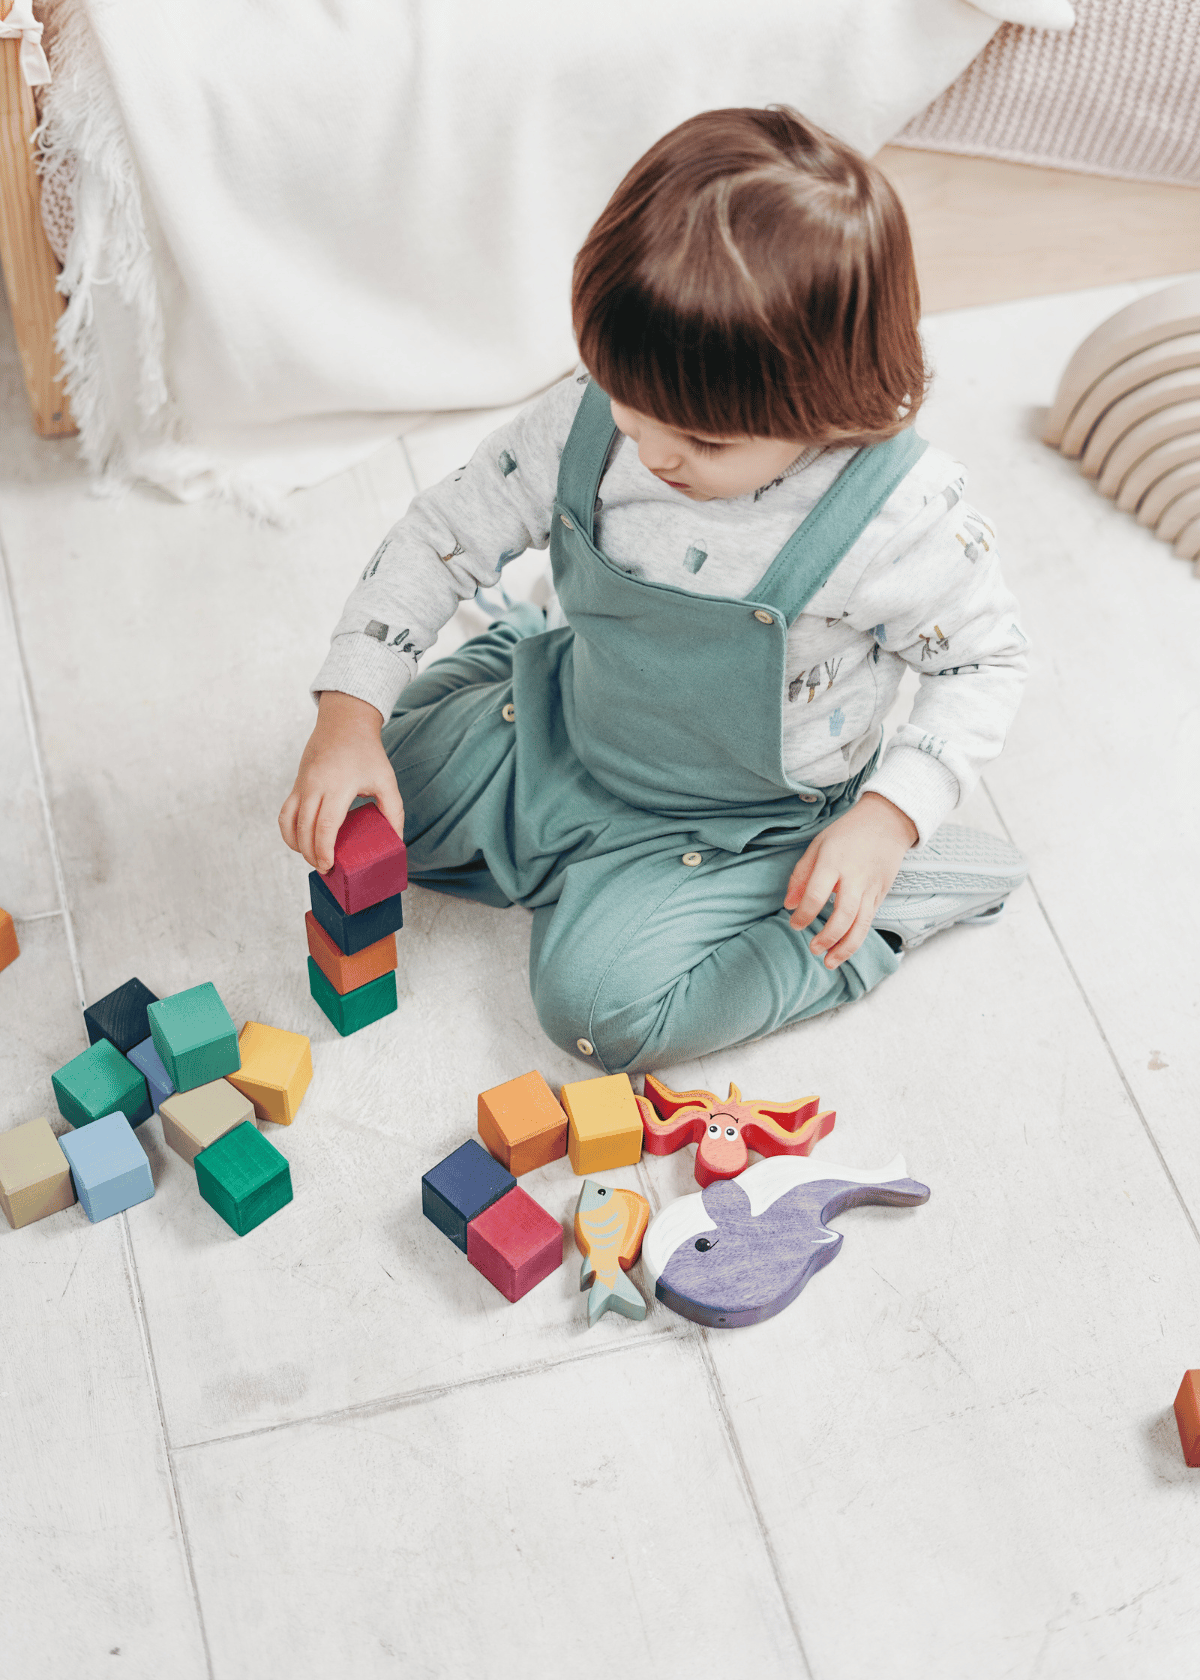 5 Best Learning And Education Toys For Your Little One